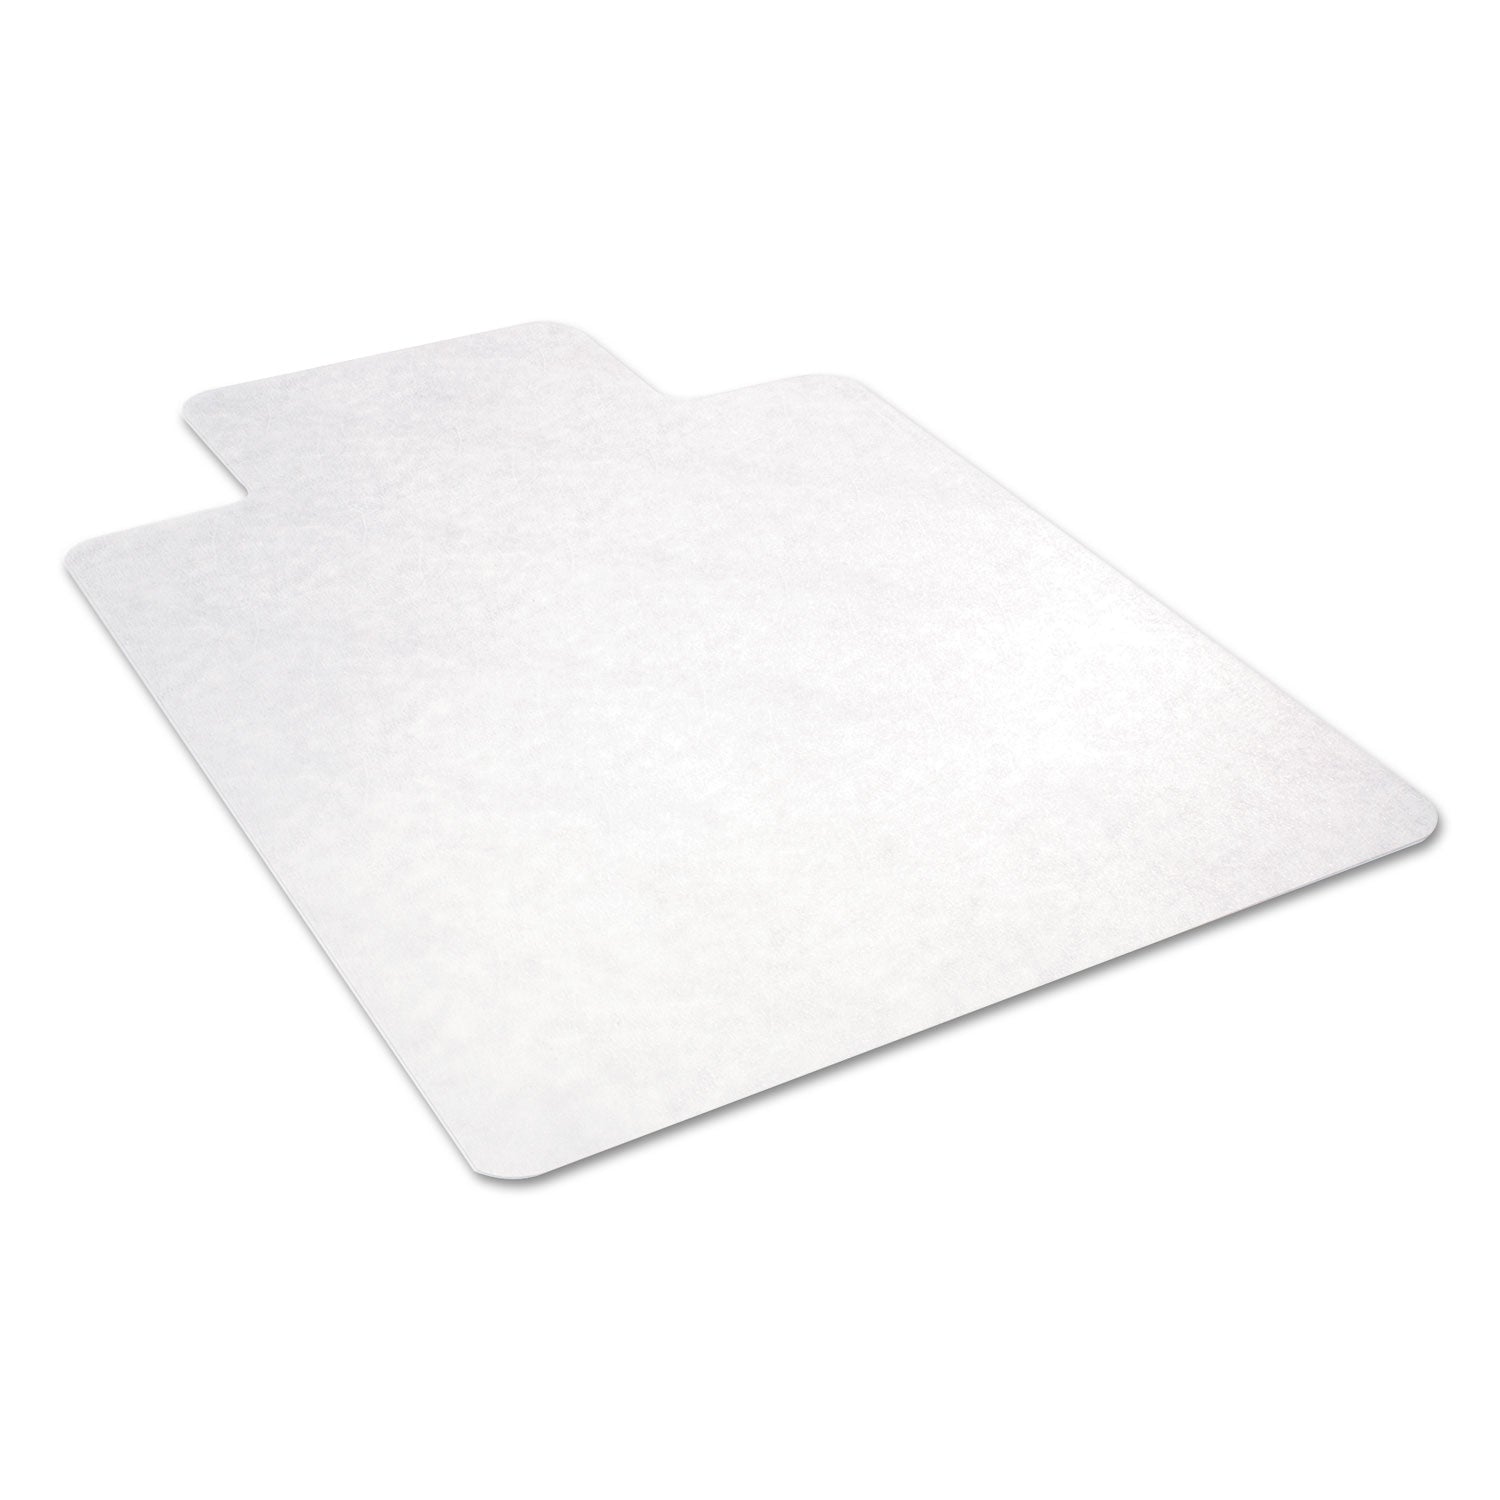 all-day-use-non-studded-chair-mat-for-hard-floors-36-x-48-lipped-clear_alemat3648hfl - 7